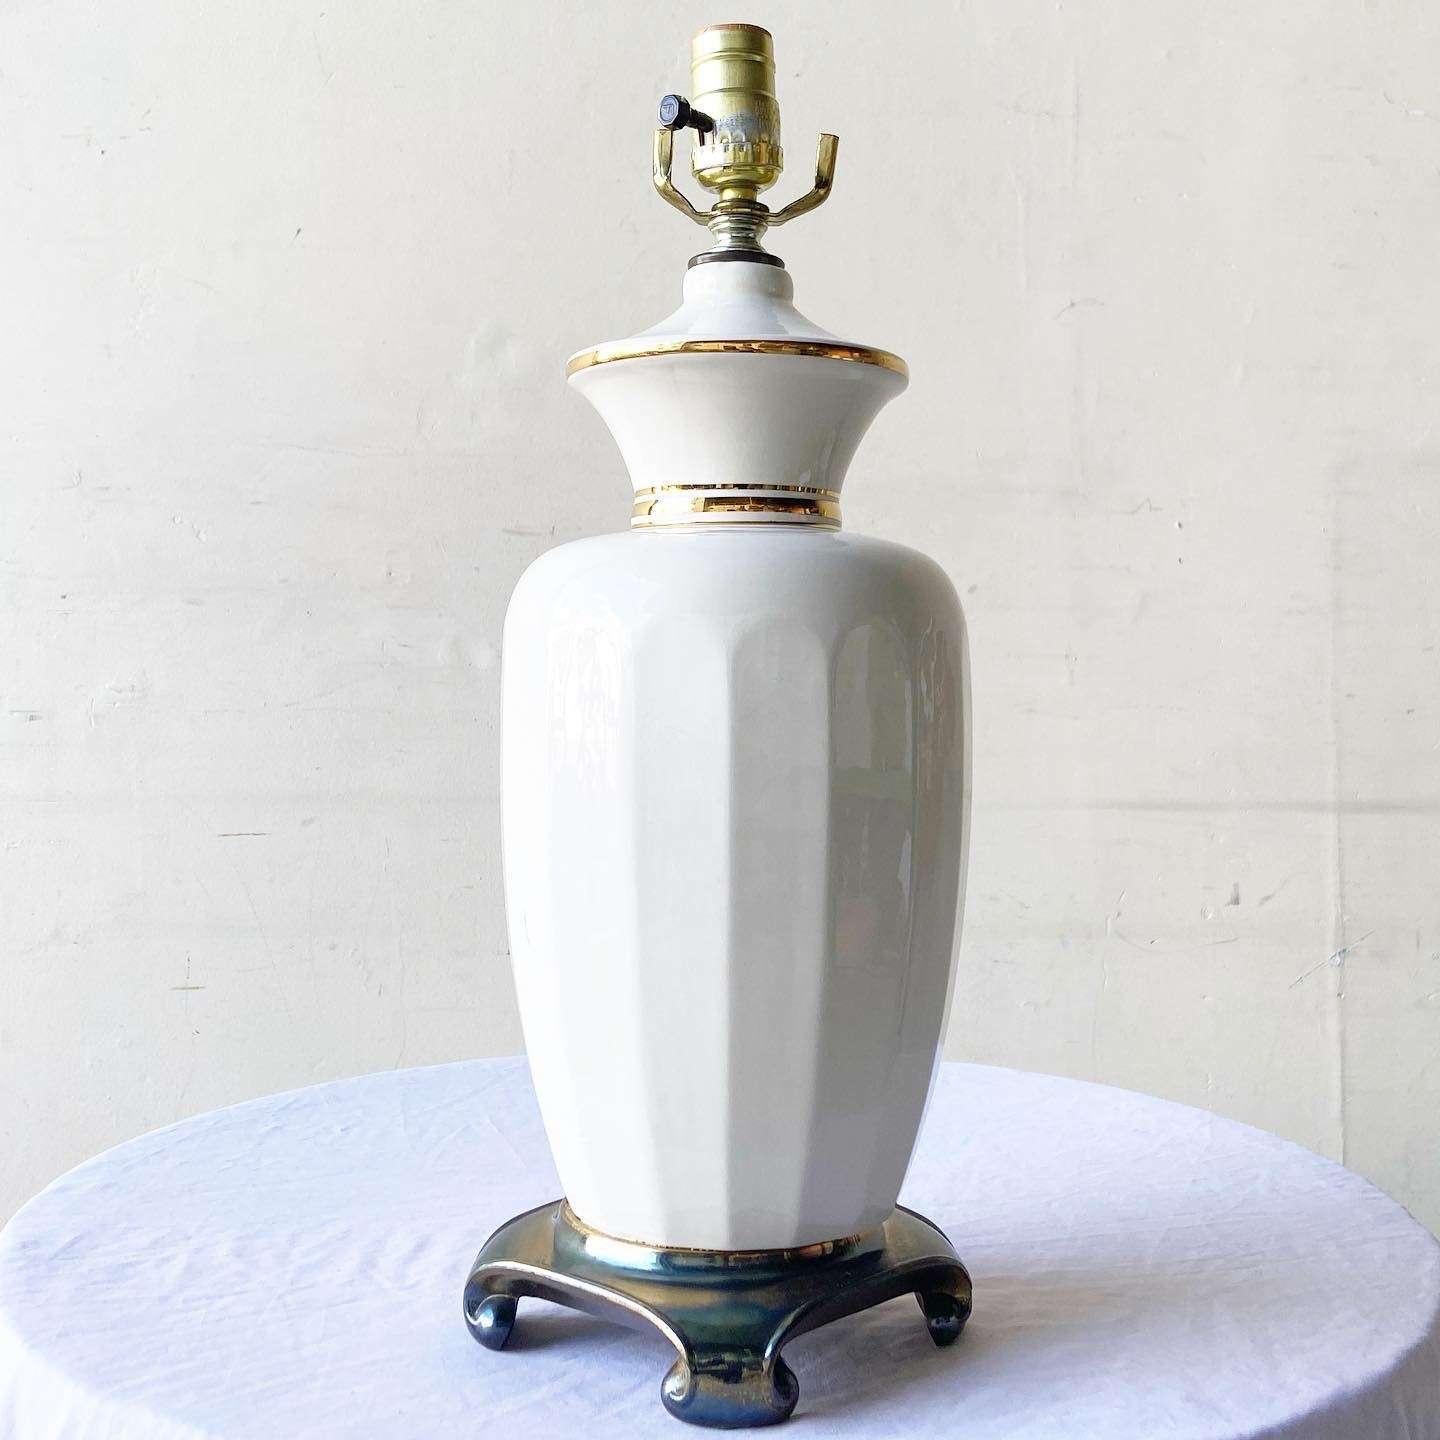 Exceptional ceramic table lamp. Features a cream gloss finish with a gold base.
